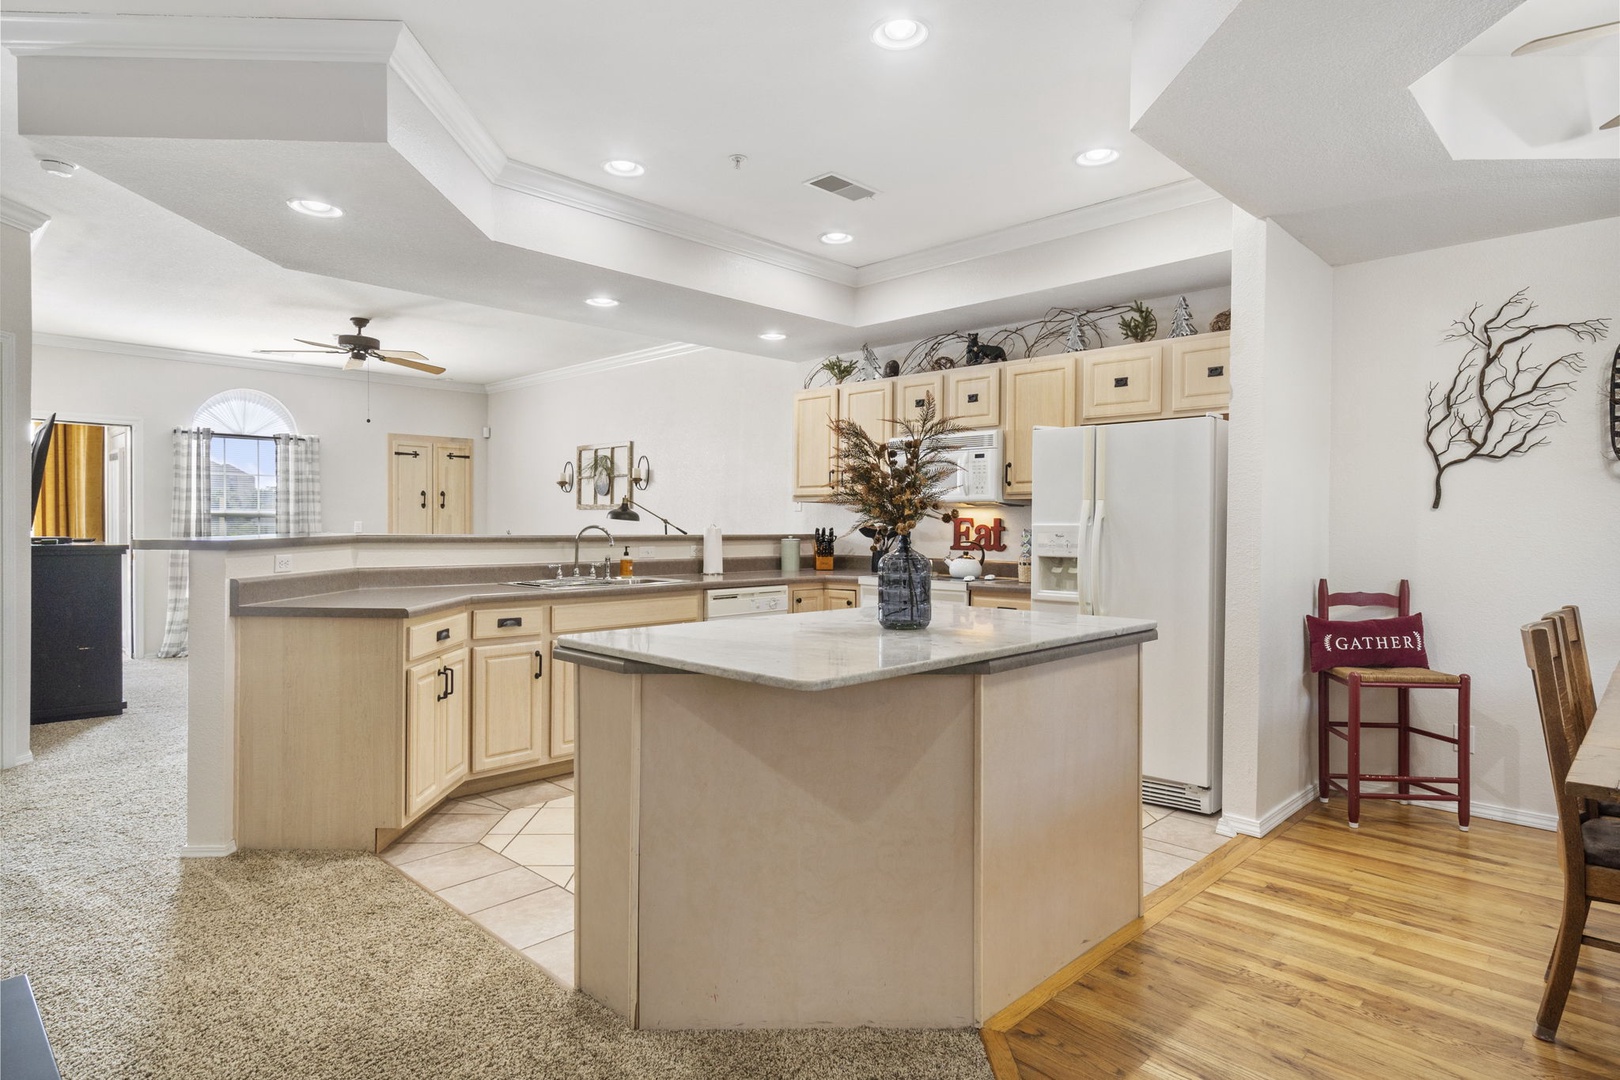 The open, airy kitchen is spacious & offers all the comforts of home